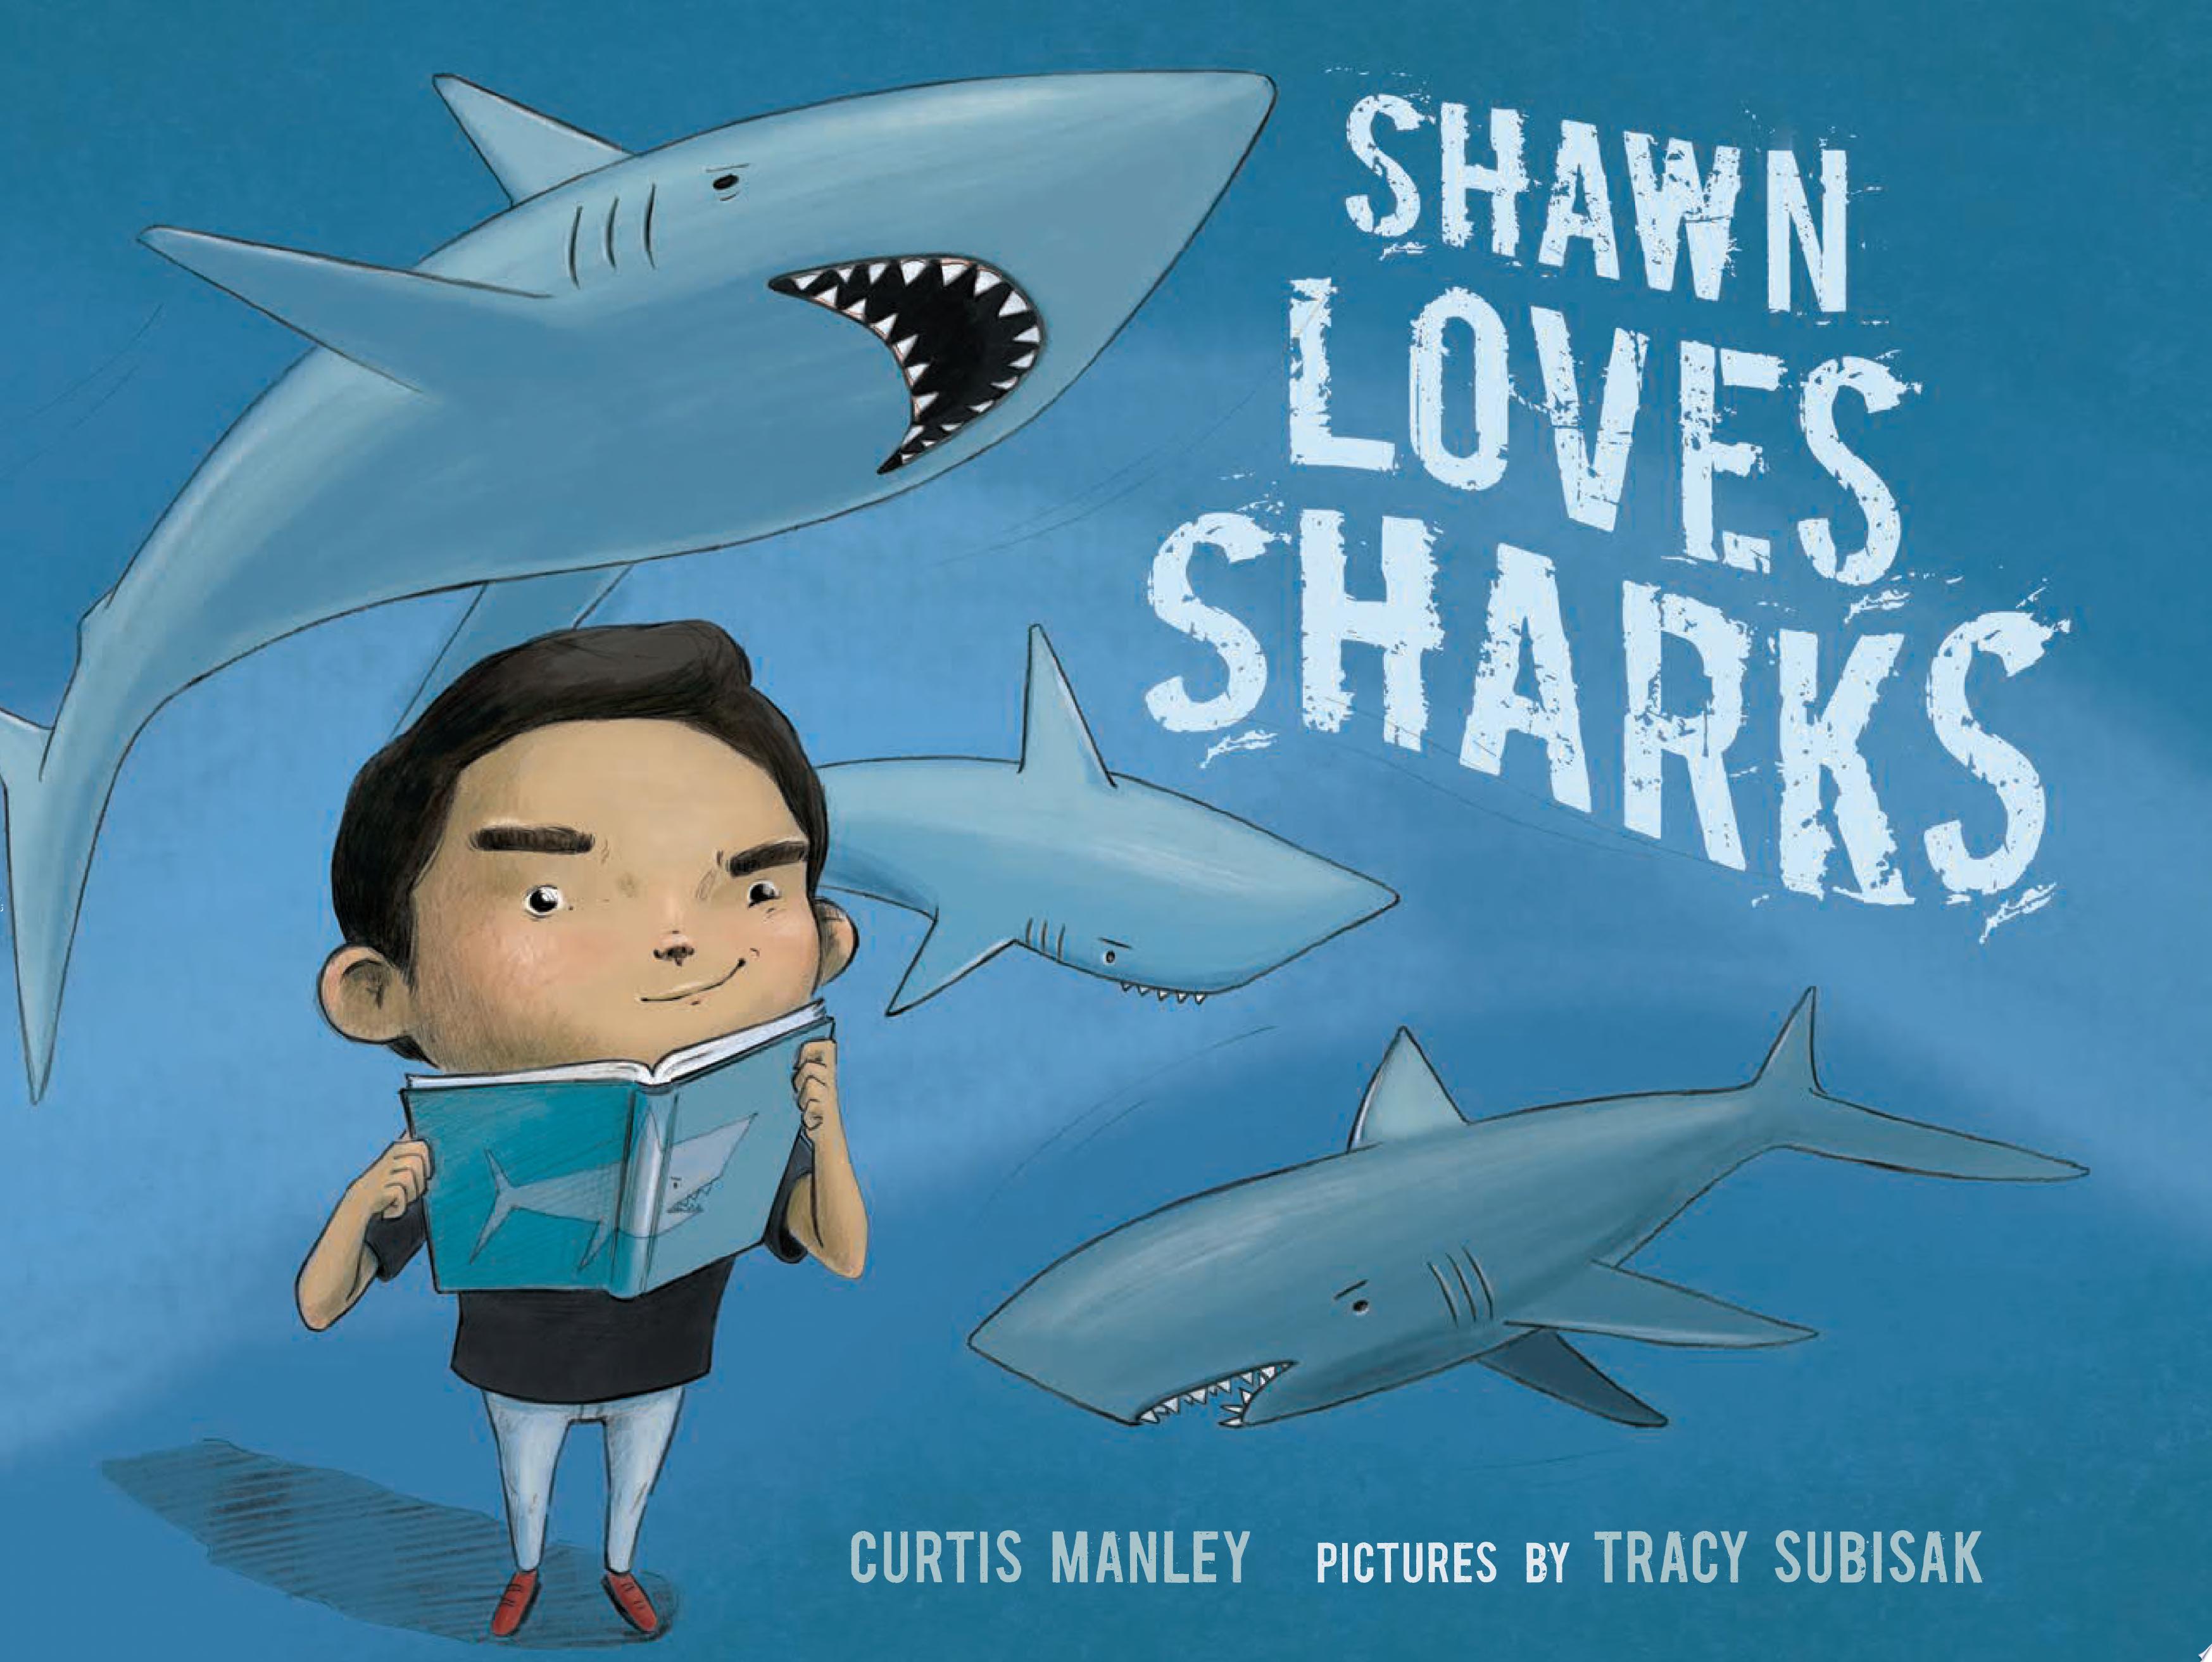 Image for "Shawn Loves Sharks"